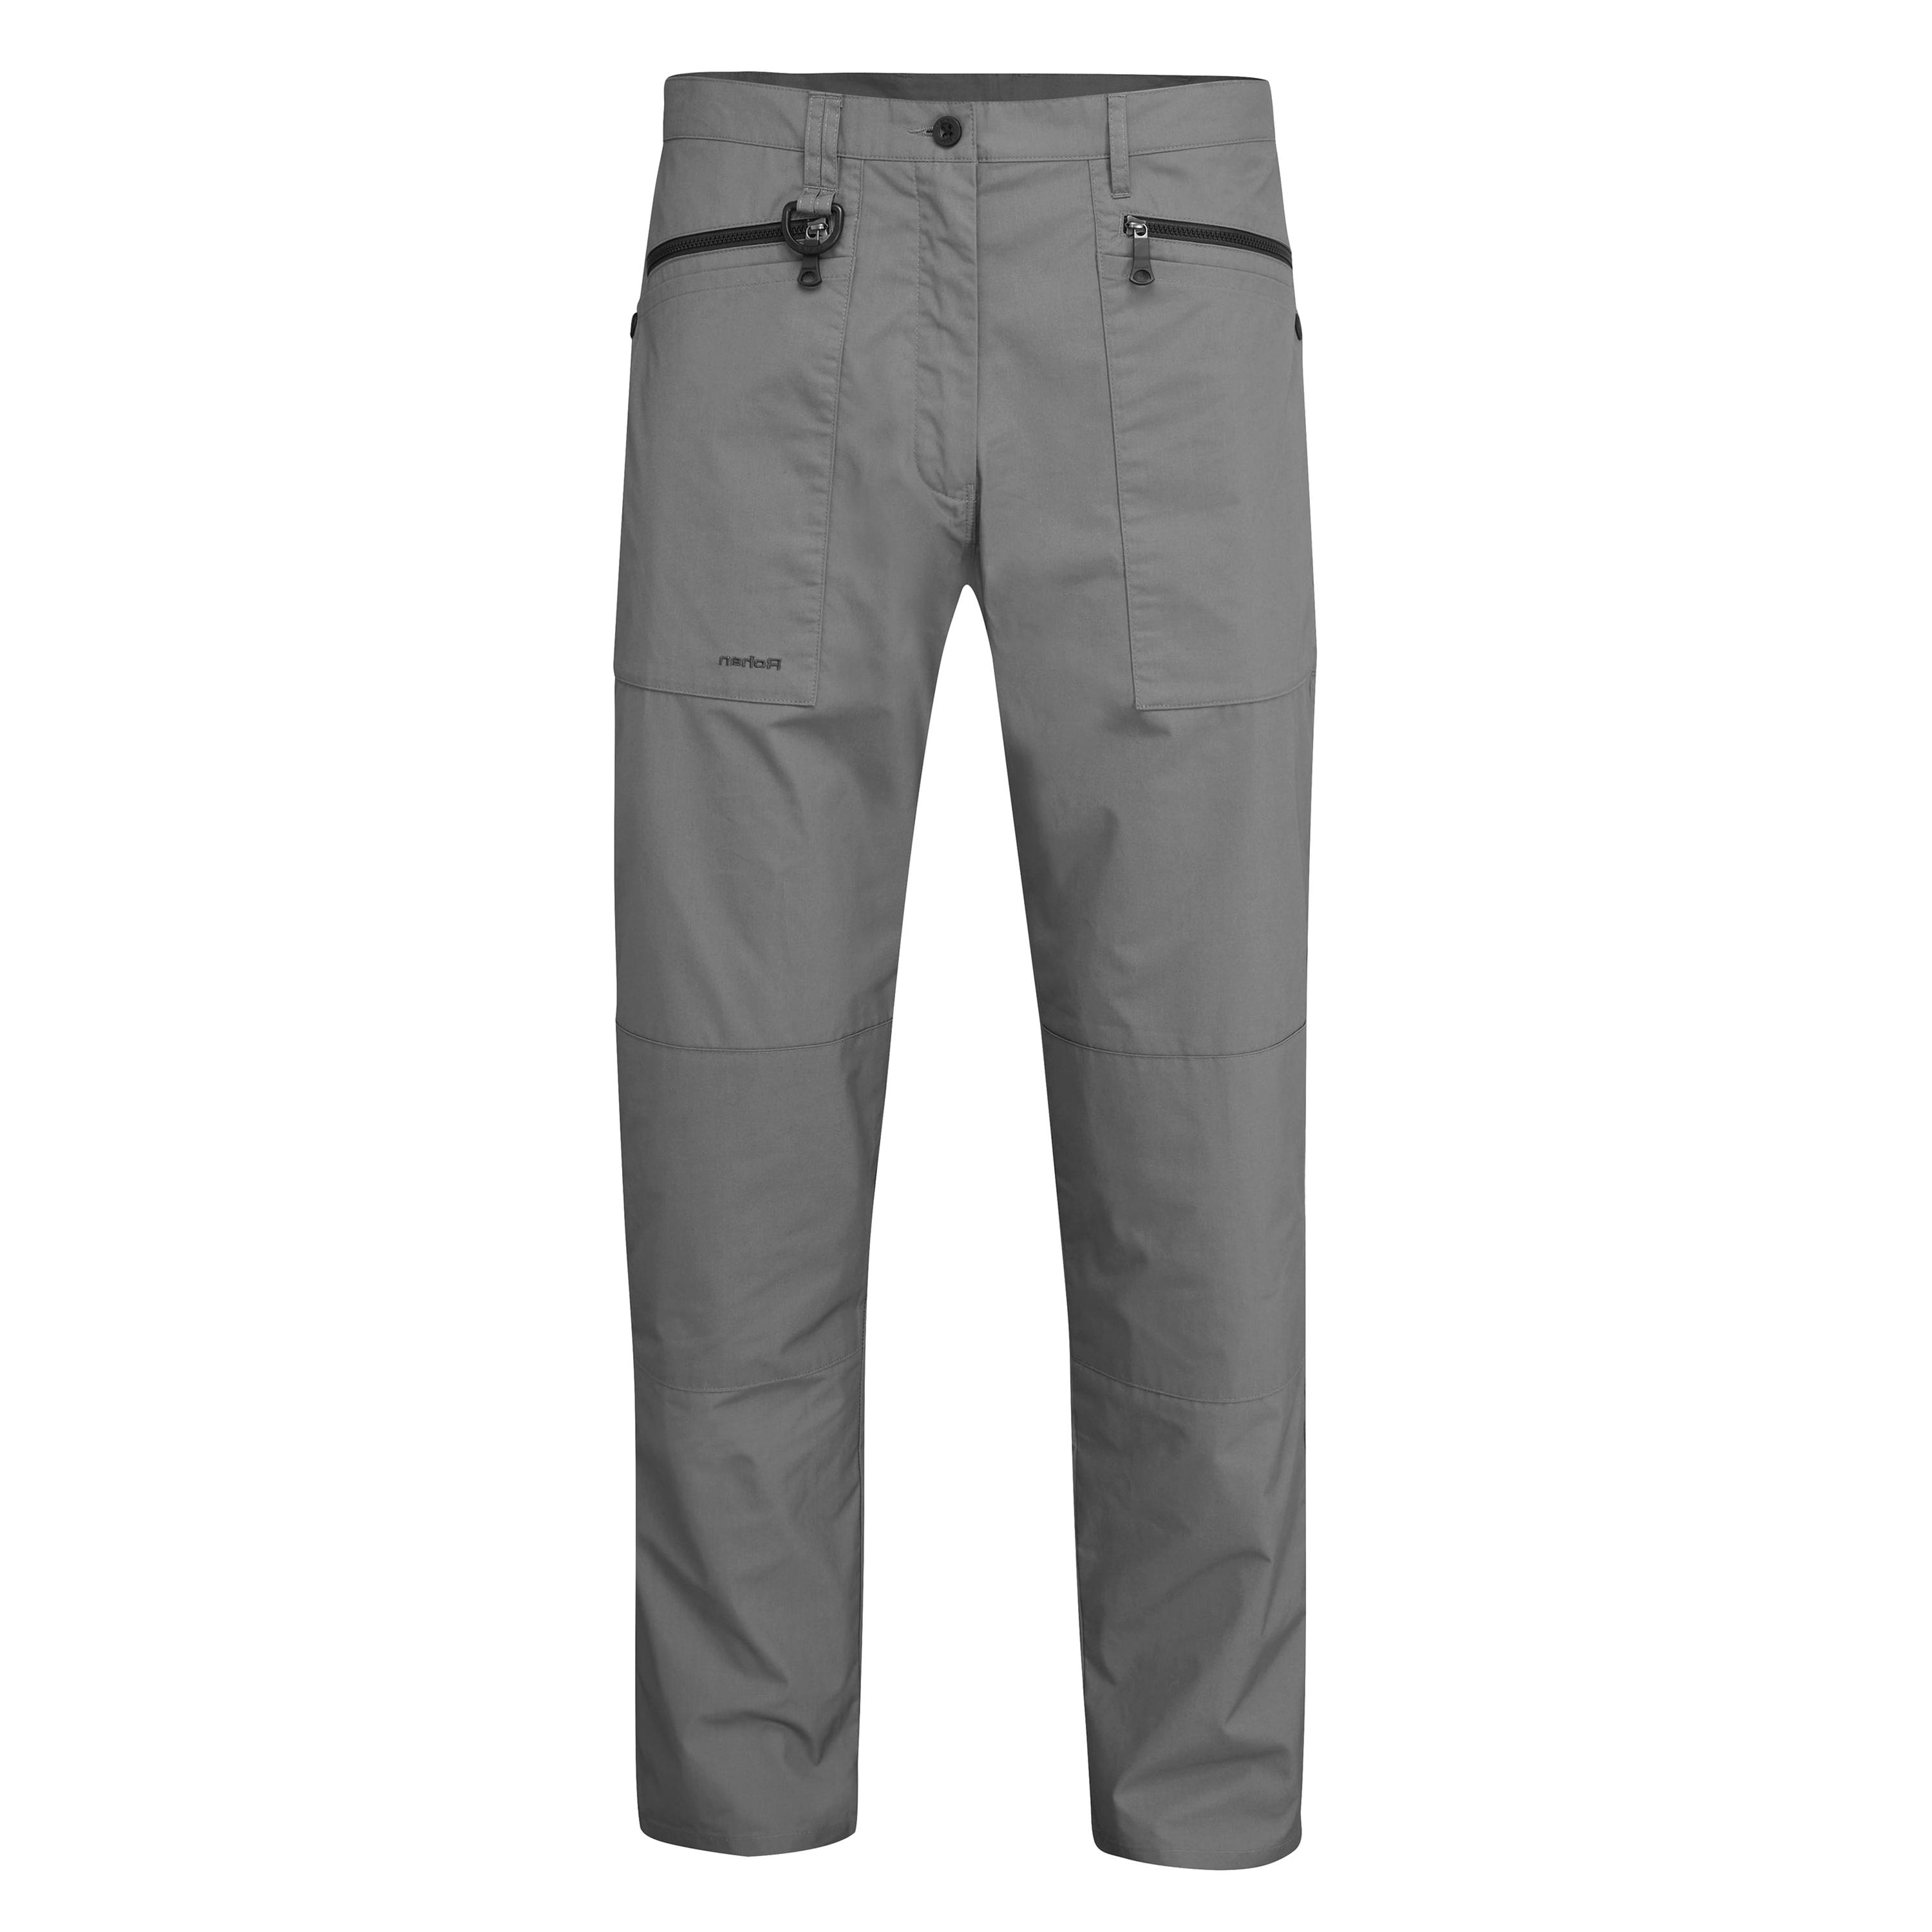 Rohan Trousers for sale in UK | 68 used Rohan Trousers